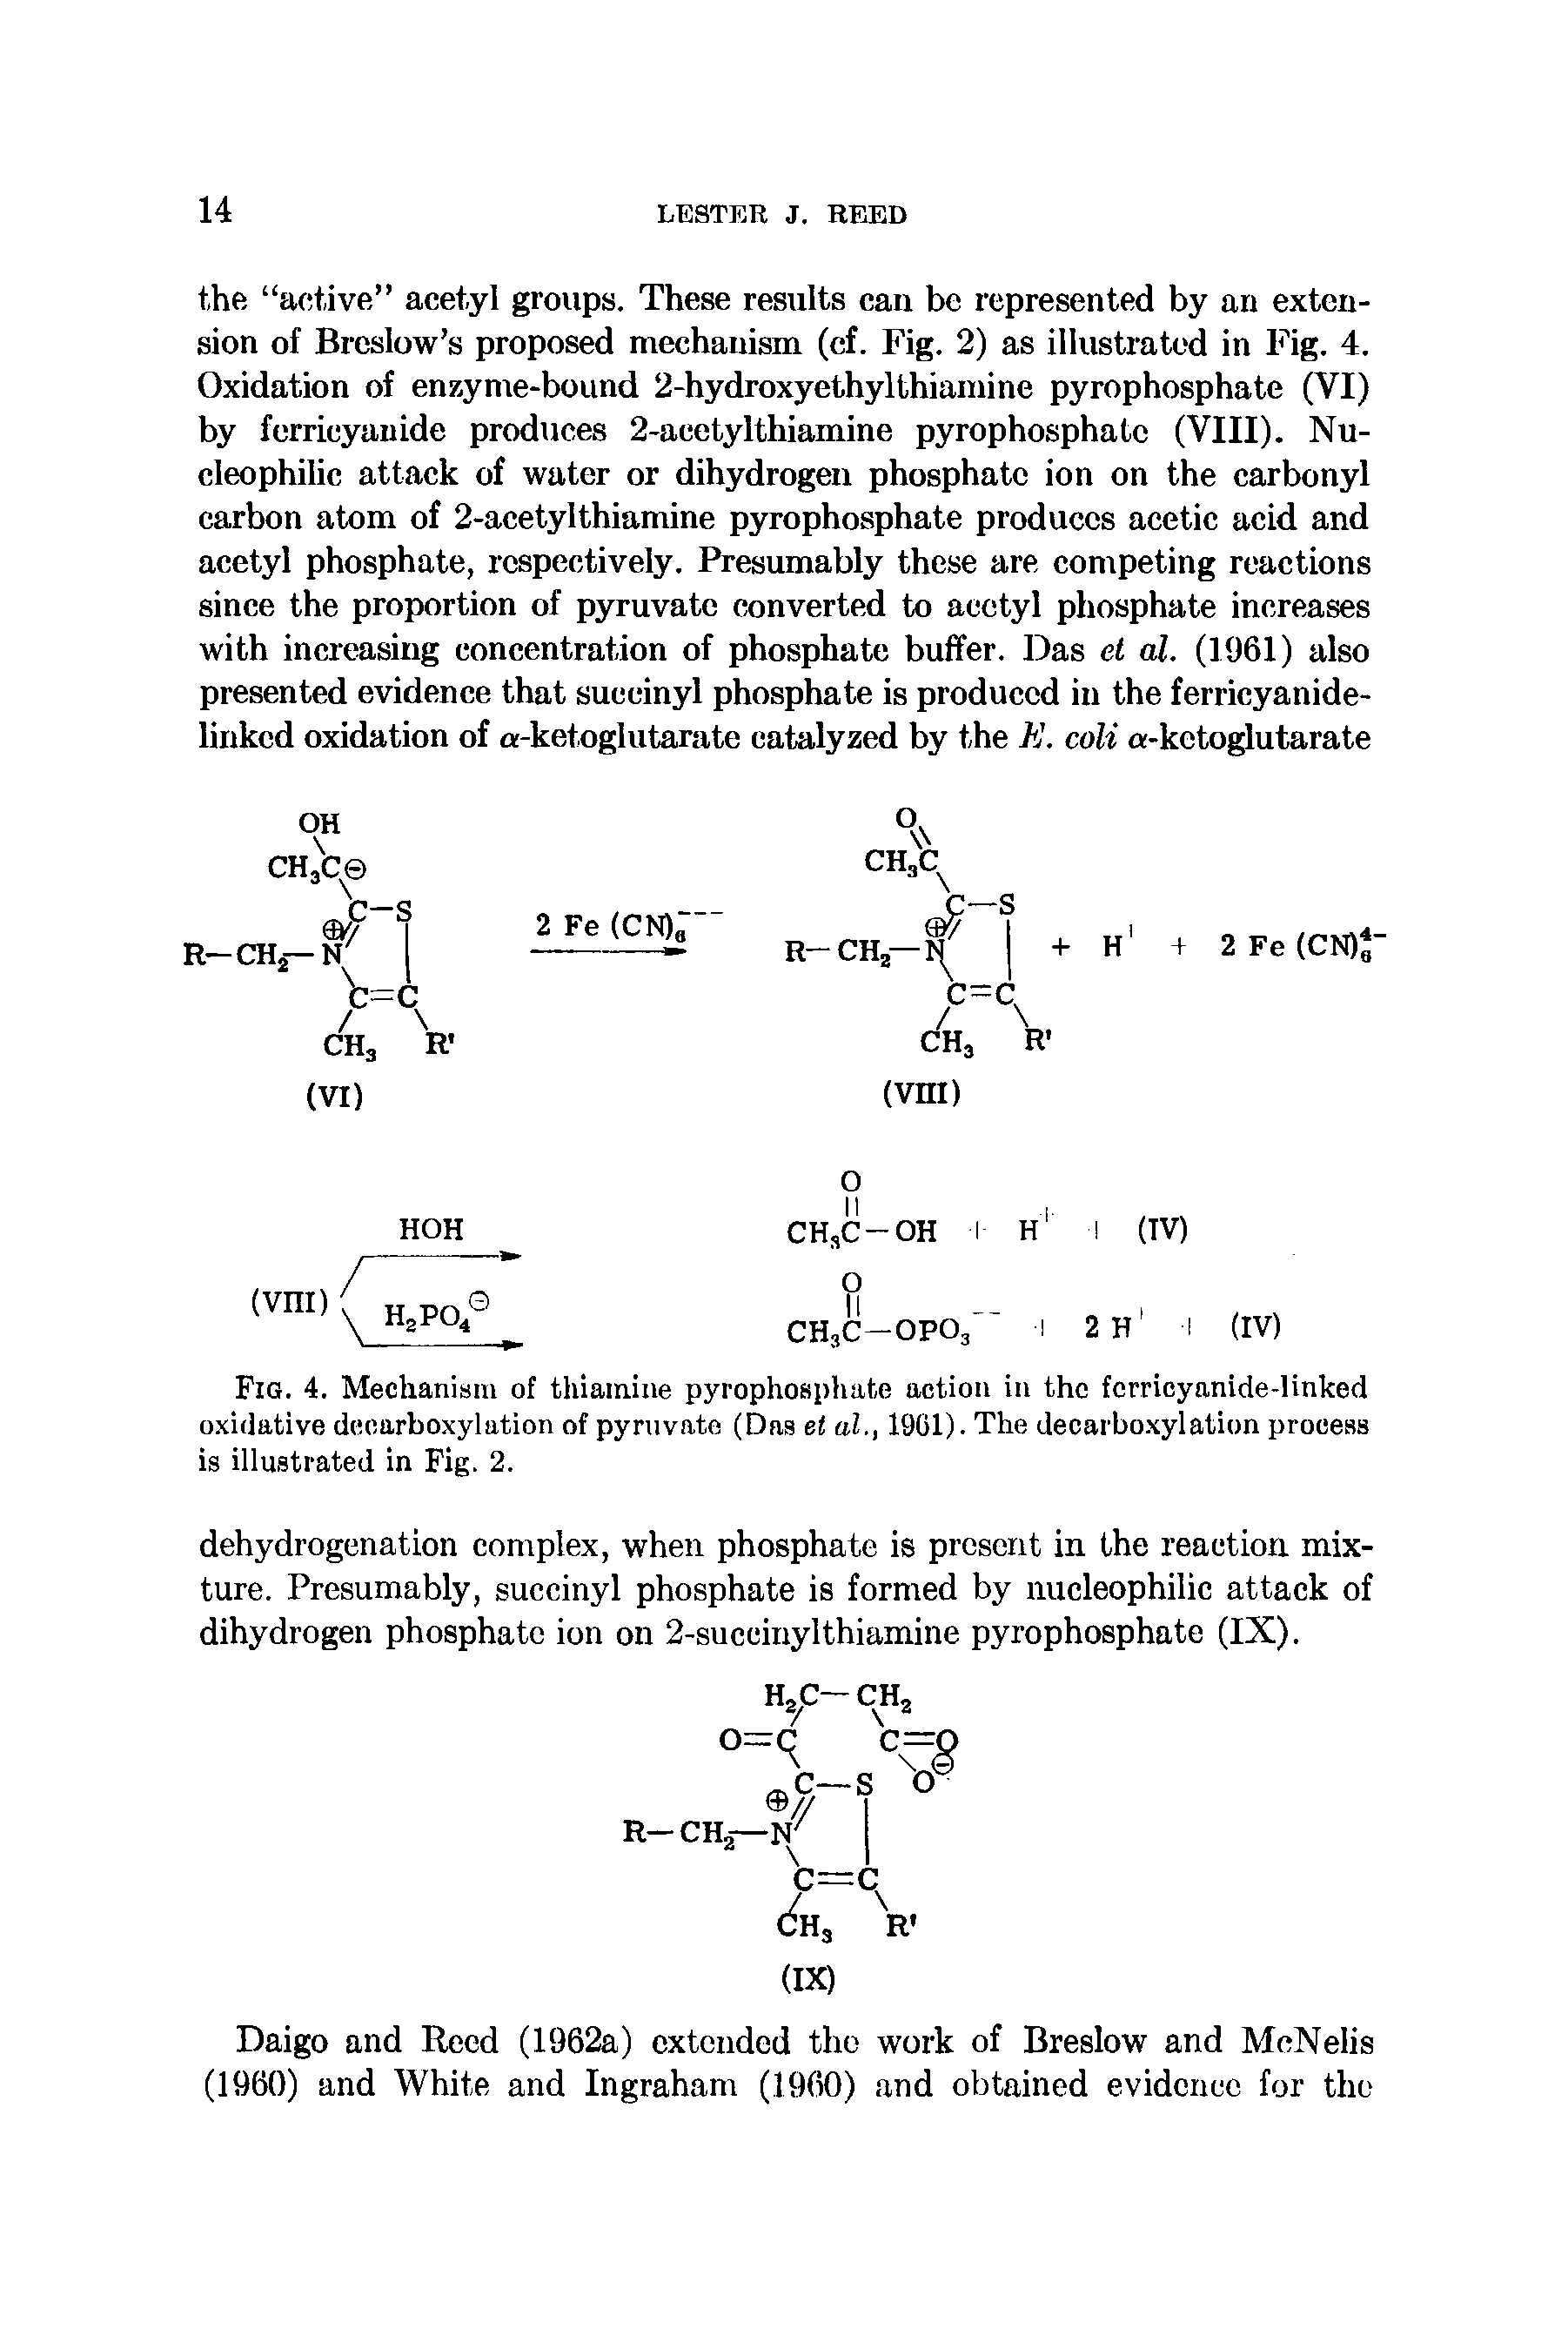 Fig. 4. Mechanism of thiamine pyrophosphate action in the fcrricyanide-linked oxidative decarboxylation of pyruvate (Das et al., 1901). The decarbo.xylation process is illustrated in Fig. 2.